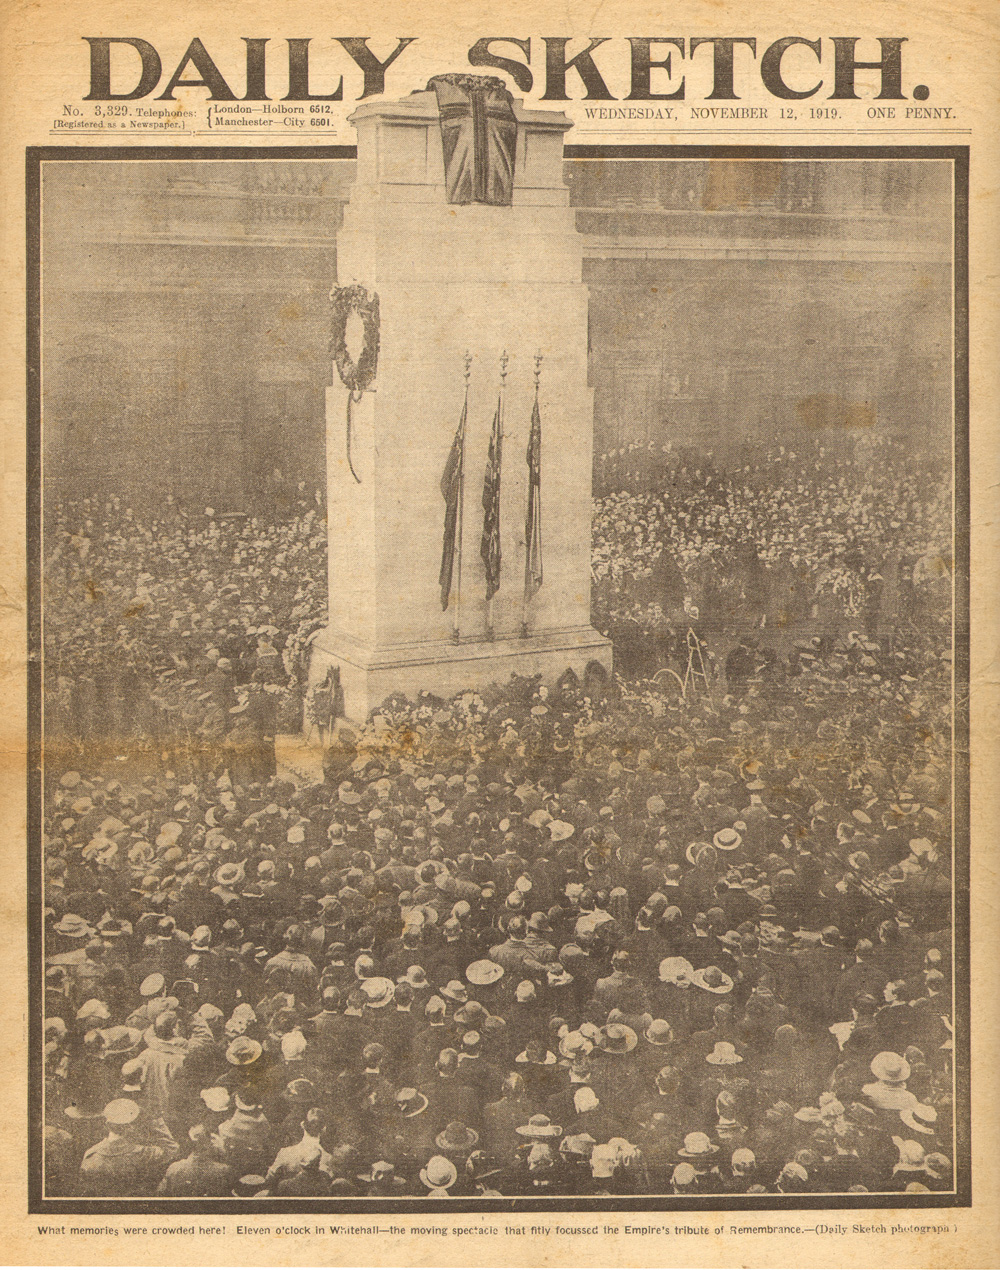 First Remembrance Day at the Cenotaph in London, November 11, 1919. The Daily Sketch, Mary Evans Picture Library.